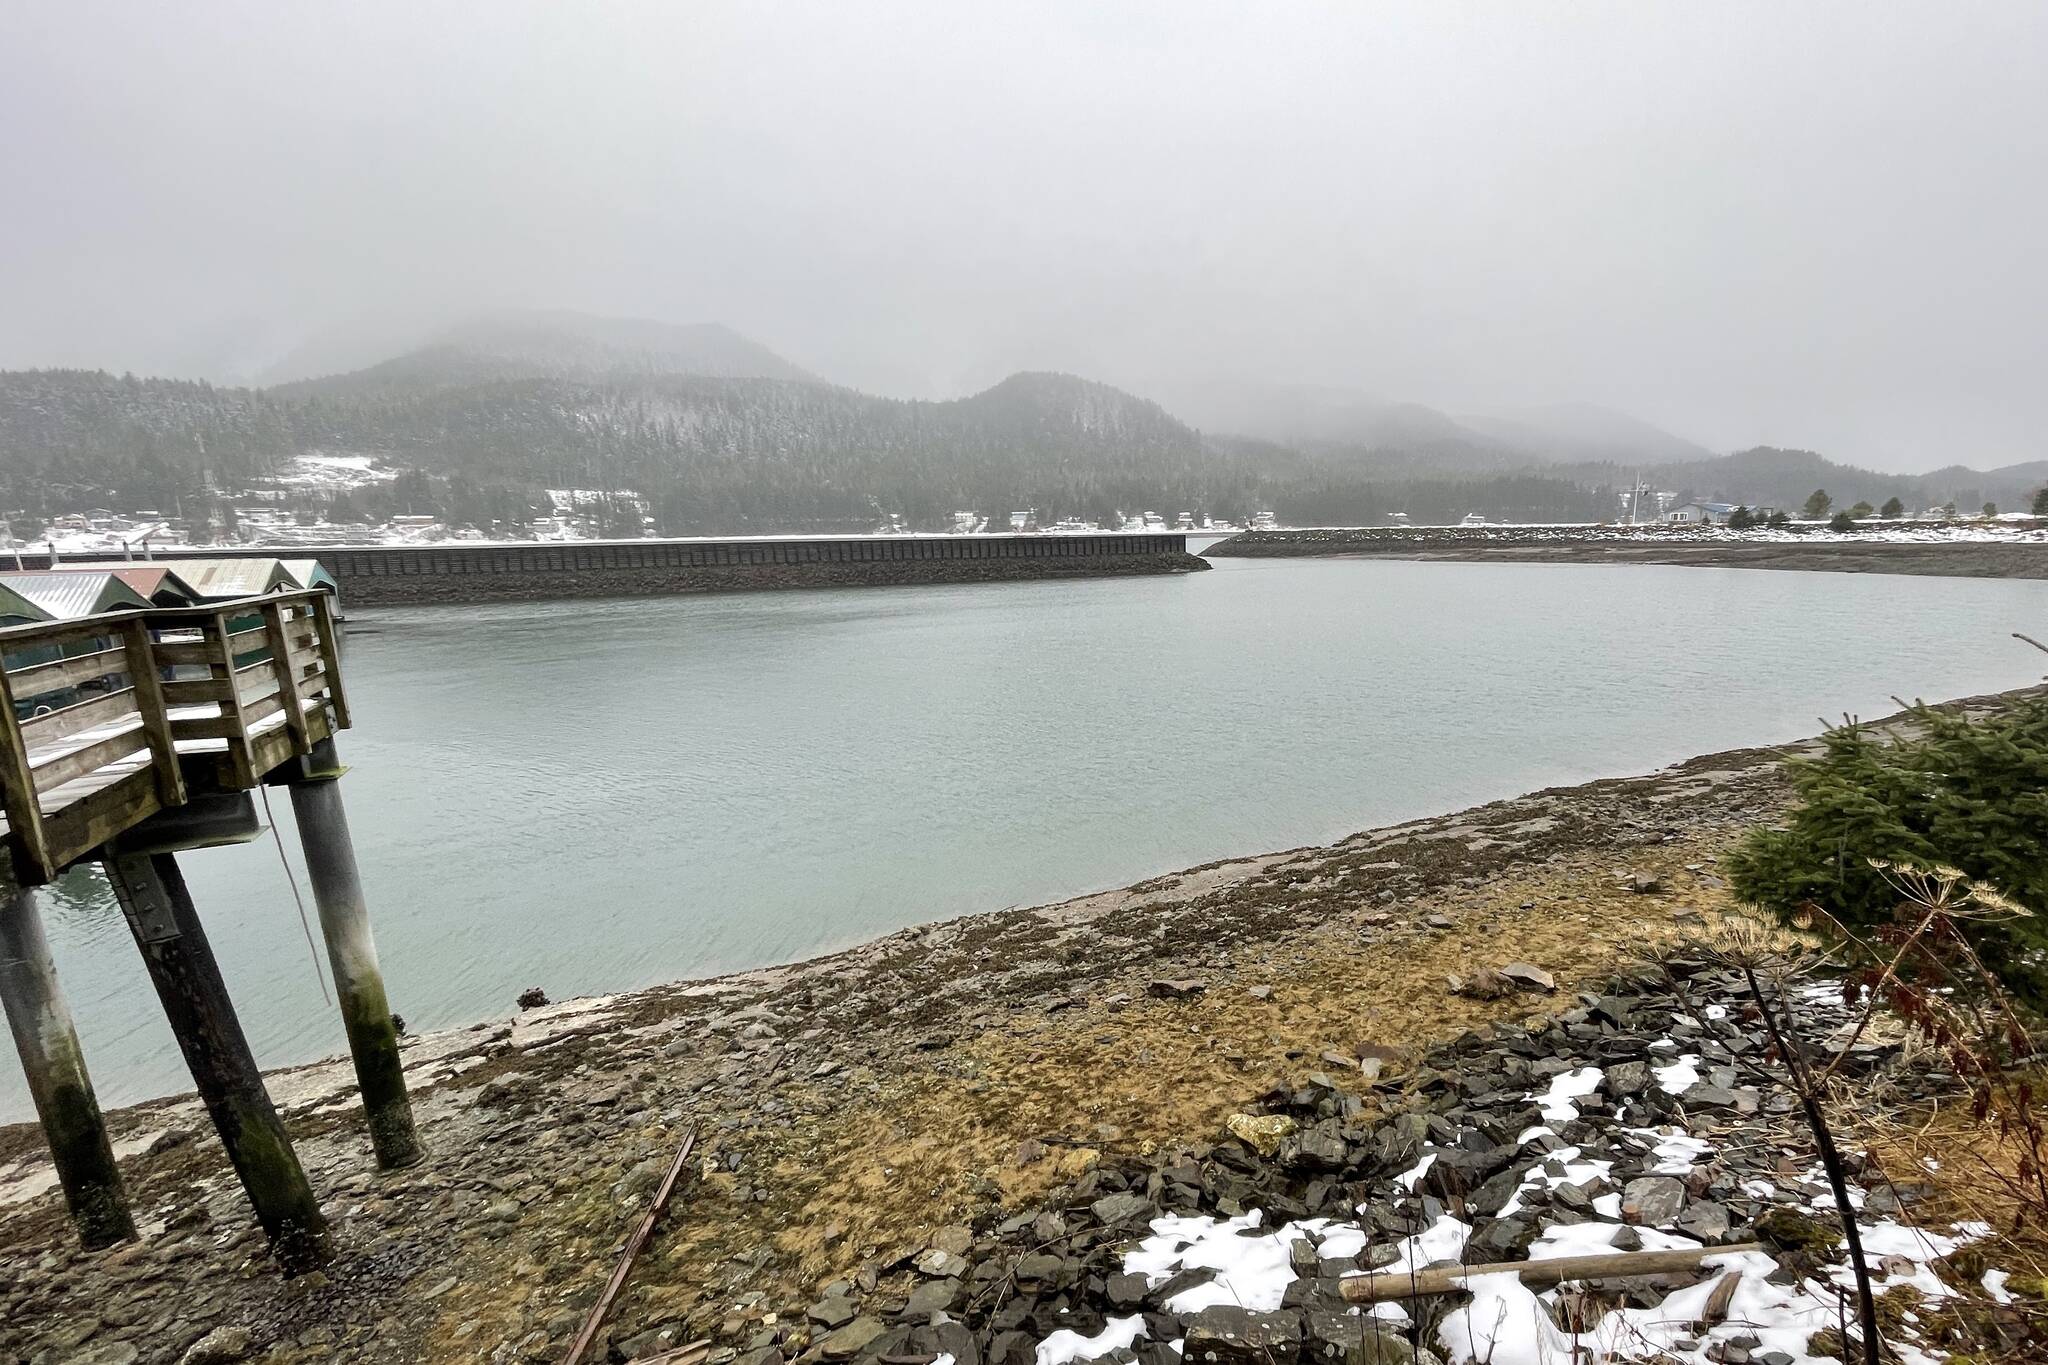 Juneau’s Docks and Harbors department is readying for the inbound cruise season as it makes headway on other projects around the city, said the harbormaster. (Michael S. Lockett / Juneau Empire)